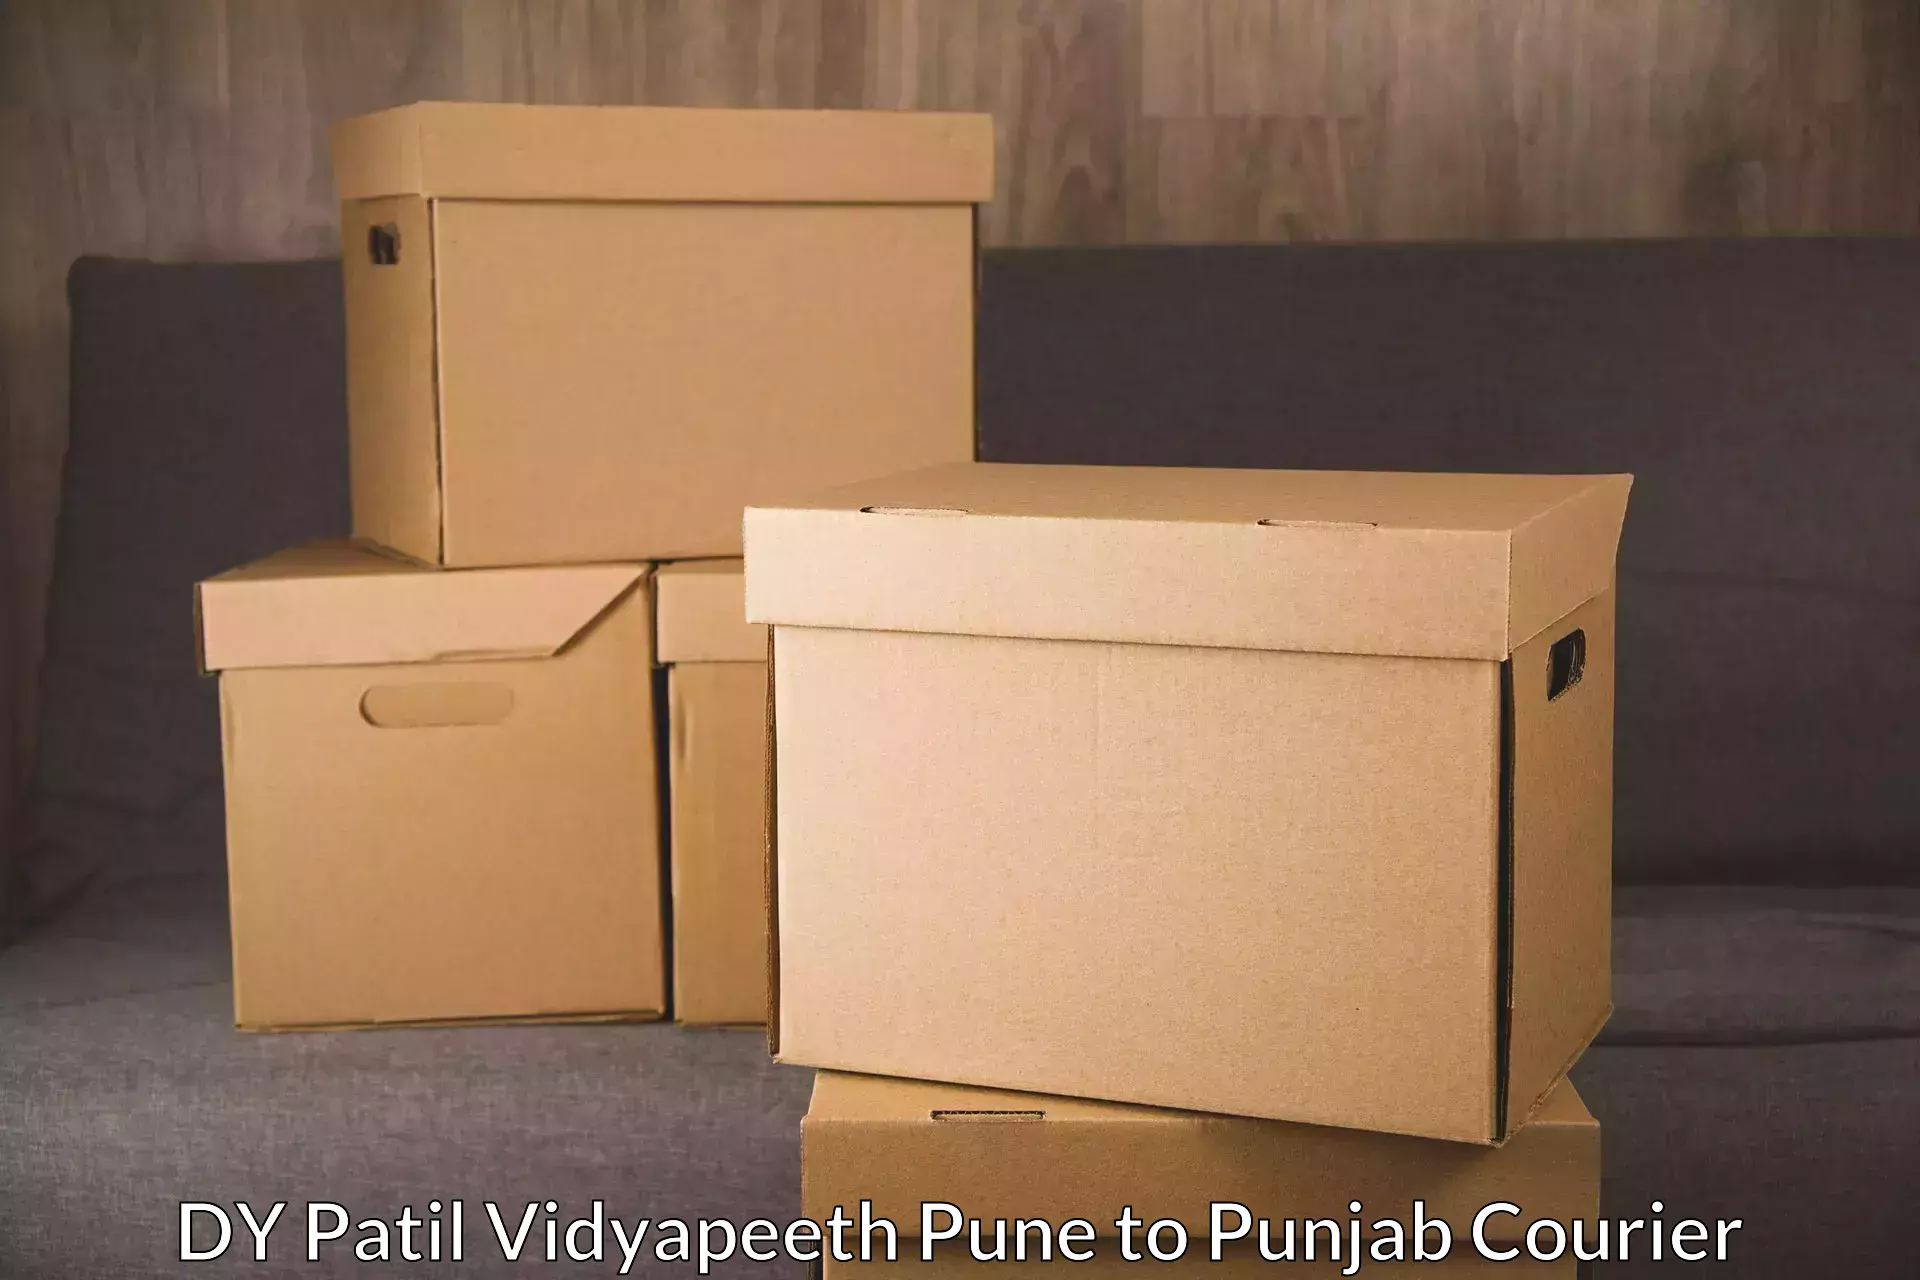 Weekend courier service DY Patil Vidyapeeth Pune to IIT Ropar